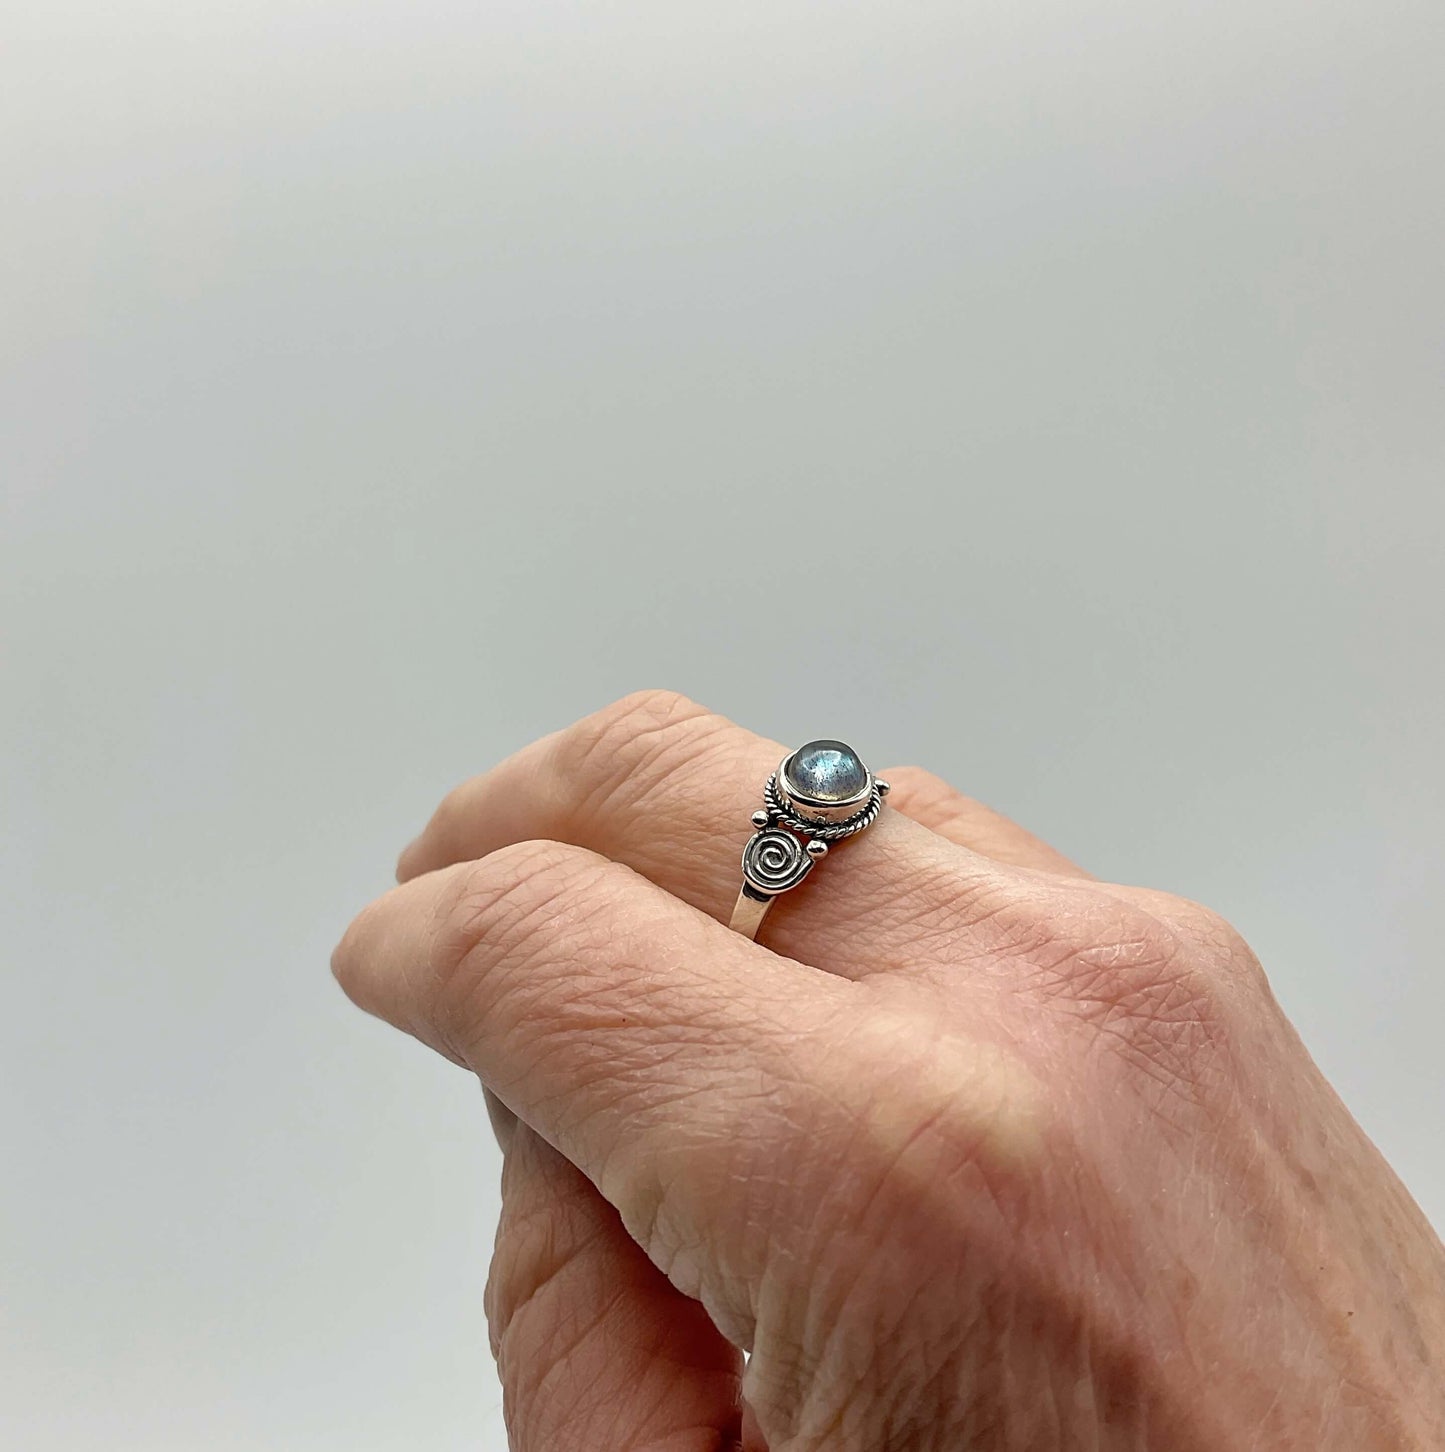 Blue moonstone silver ring on a finger